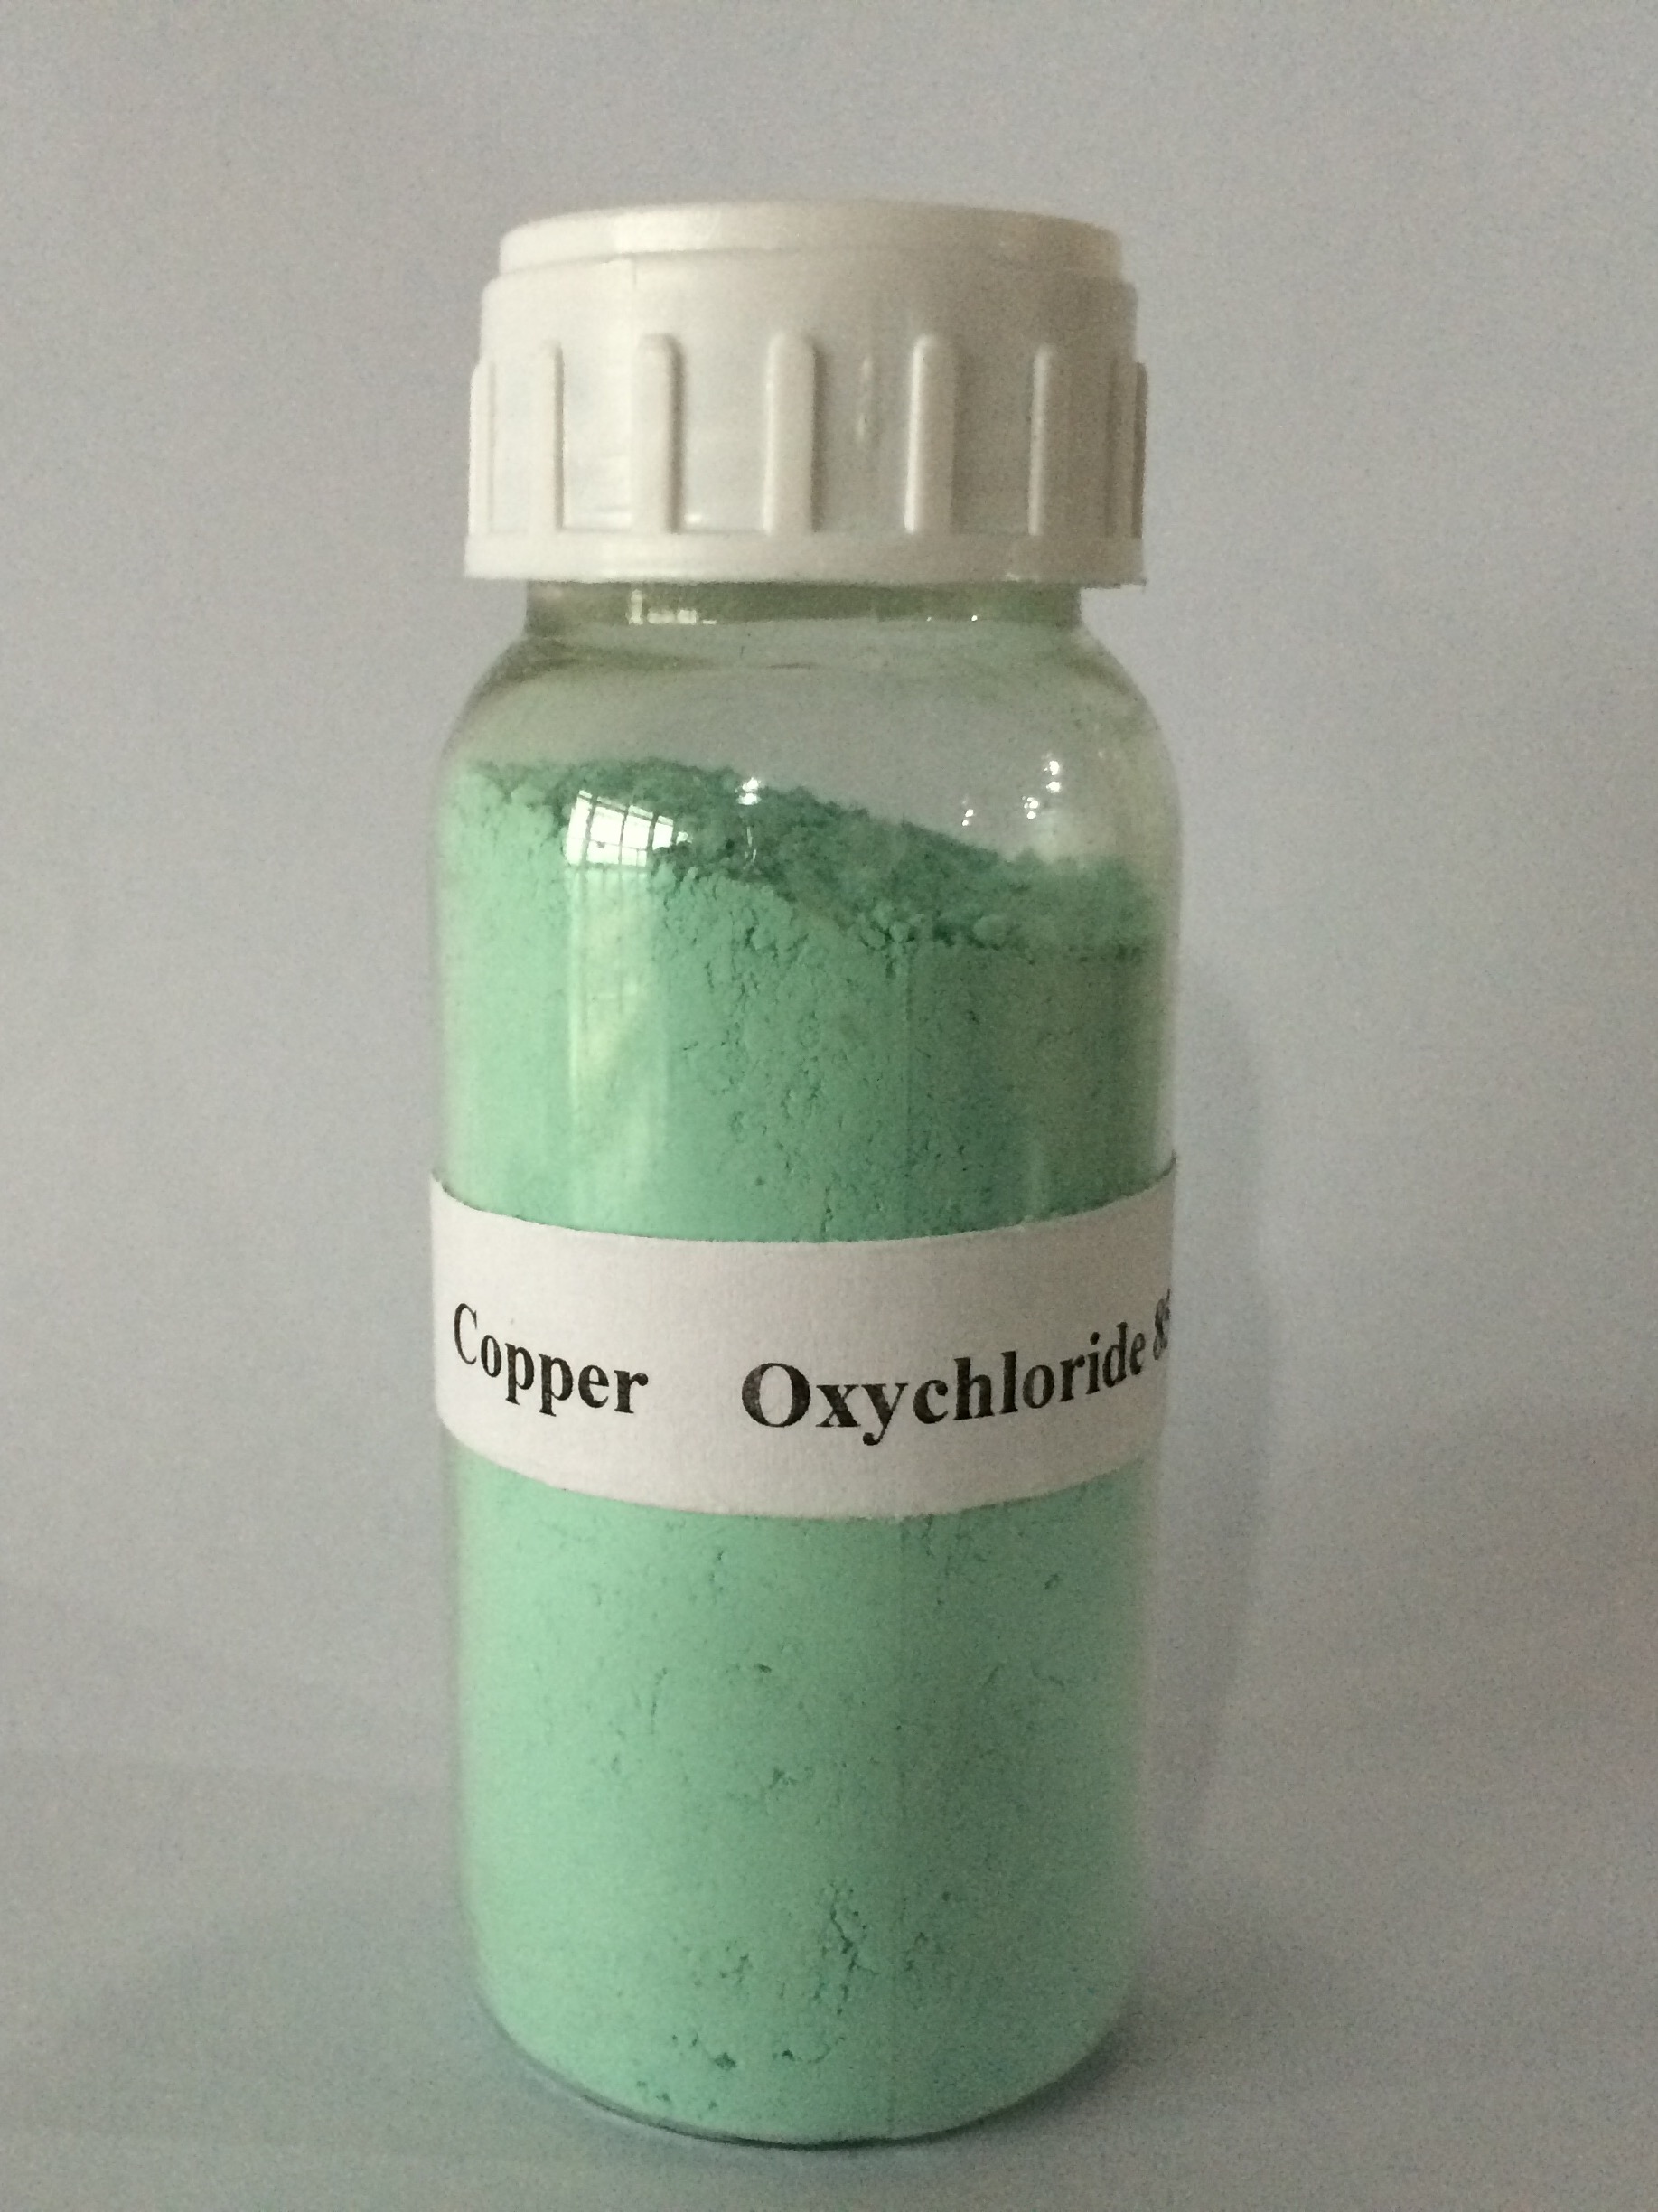 Copper oxychloride; CAS 1332-40-7; dicopper chloride trihydroxide; protectant copper fungicide and bactericide used as a foliar spray